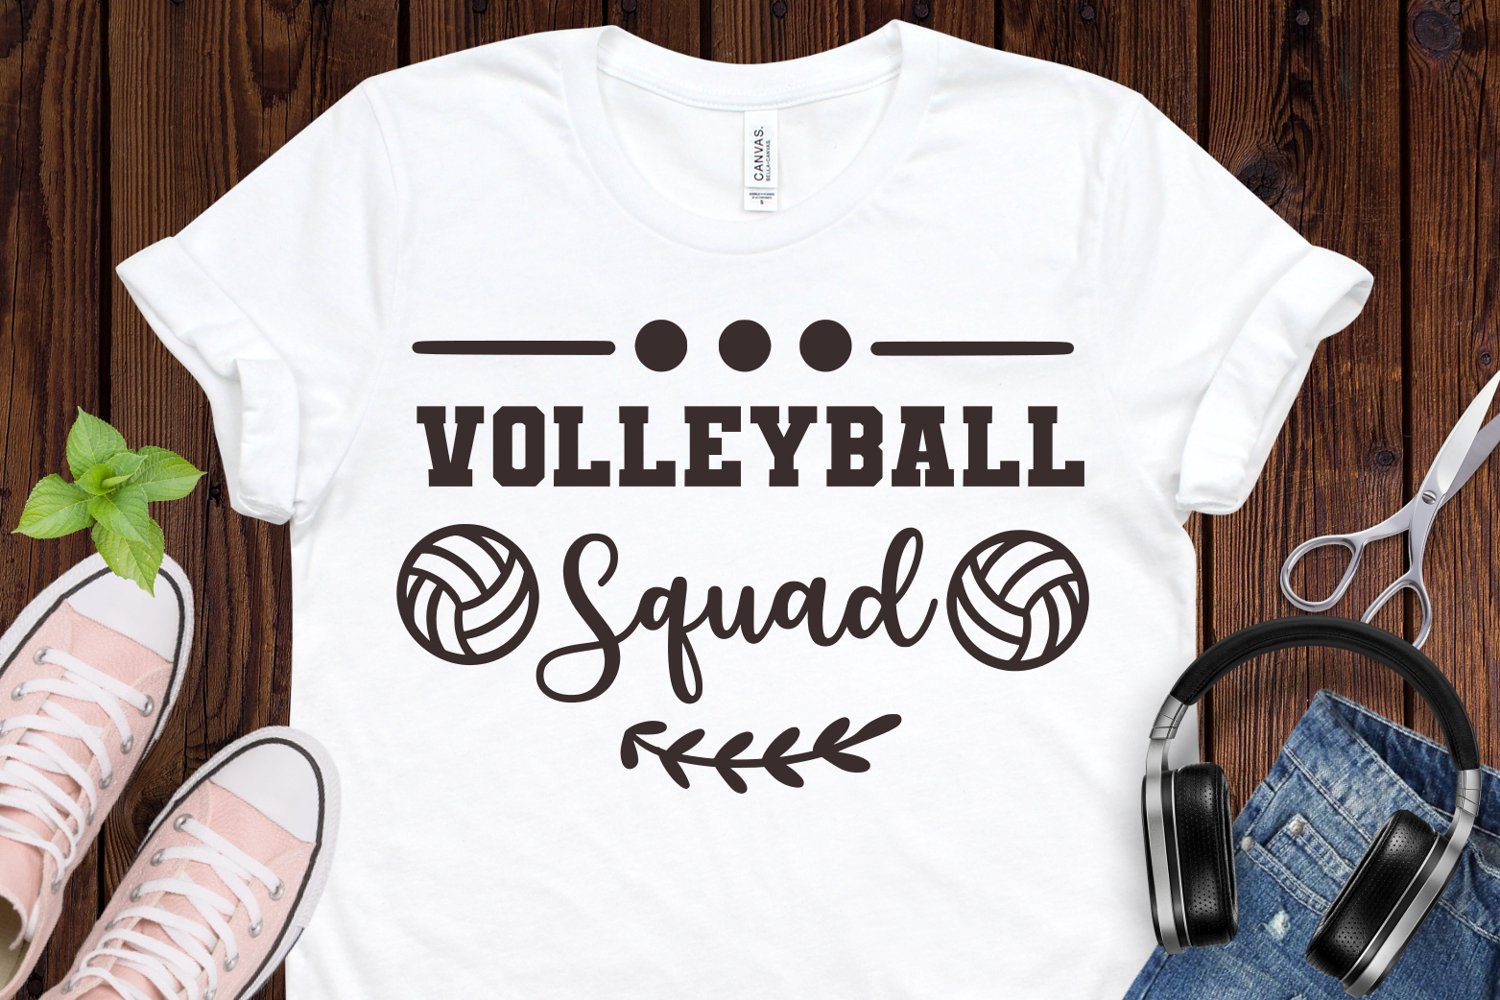 Volleyball squad - t-shirt design.